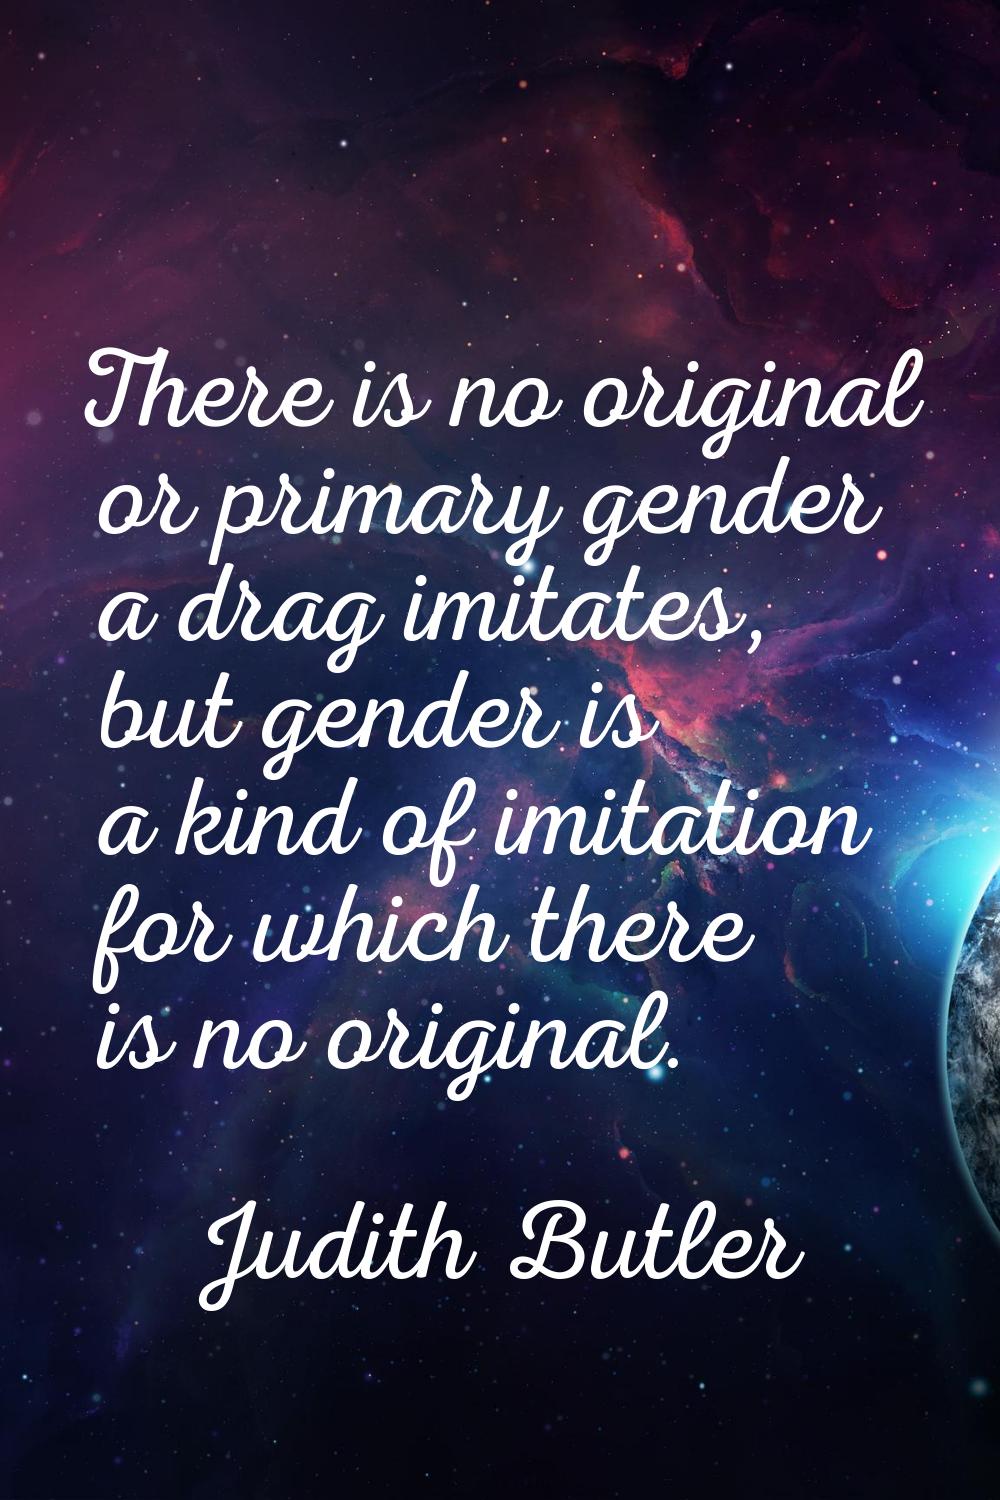 There is no original or primary gender a drag imitates, but gender is a kind of imitation for which